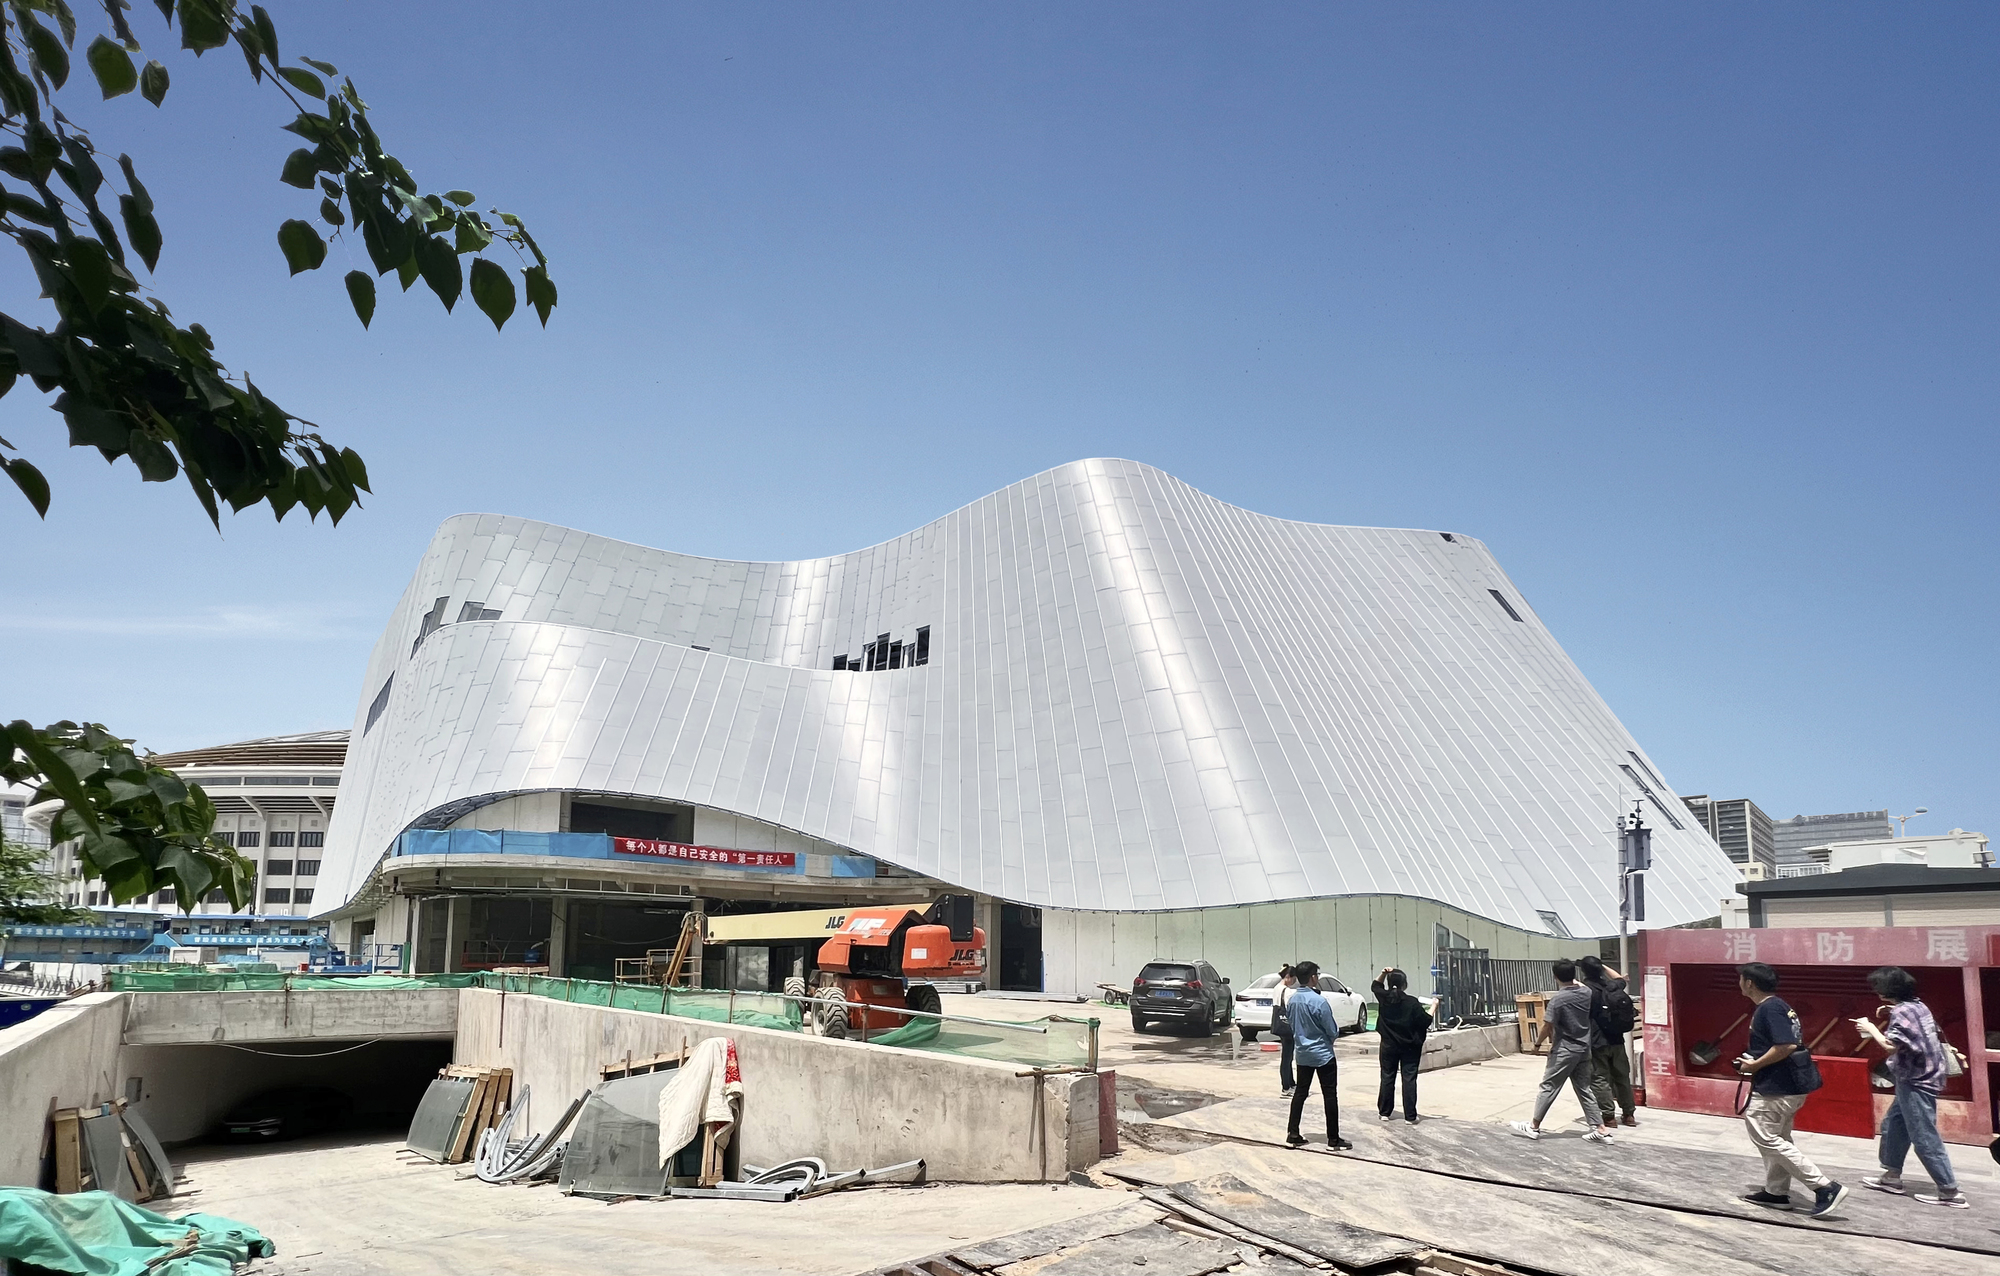 Photos of the construction of the China Philharmonic Concert Hall are circulating on several social media